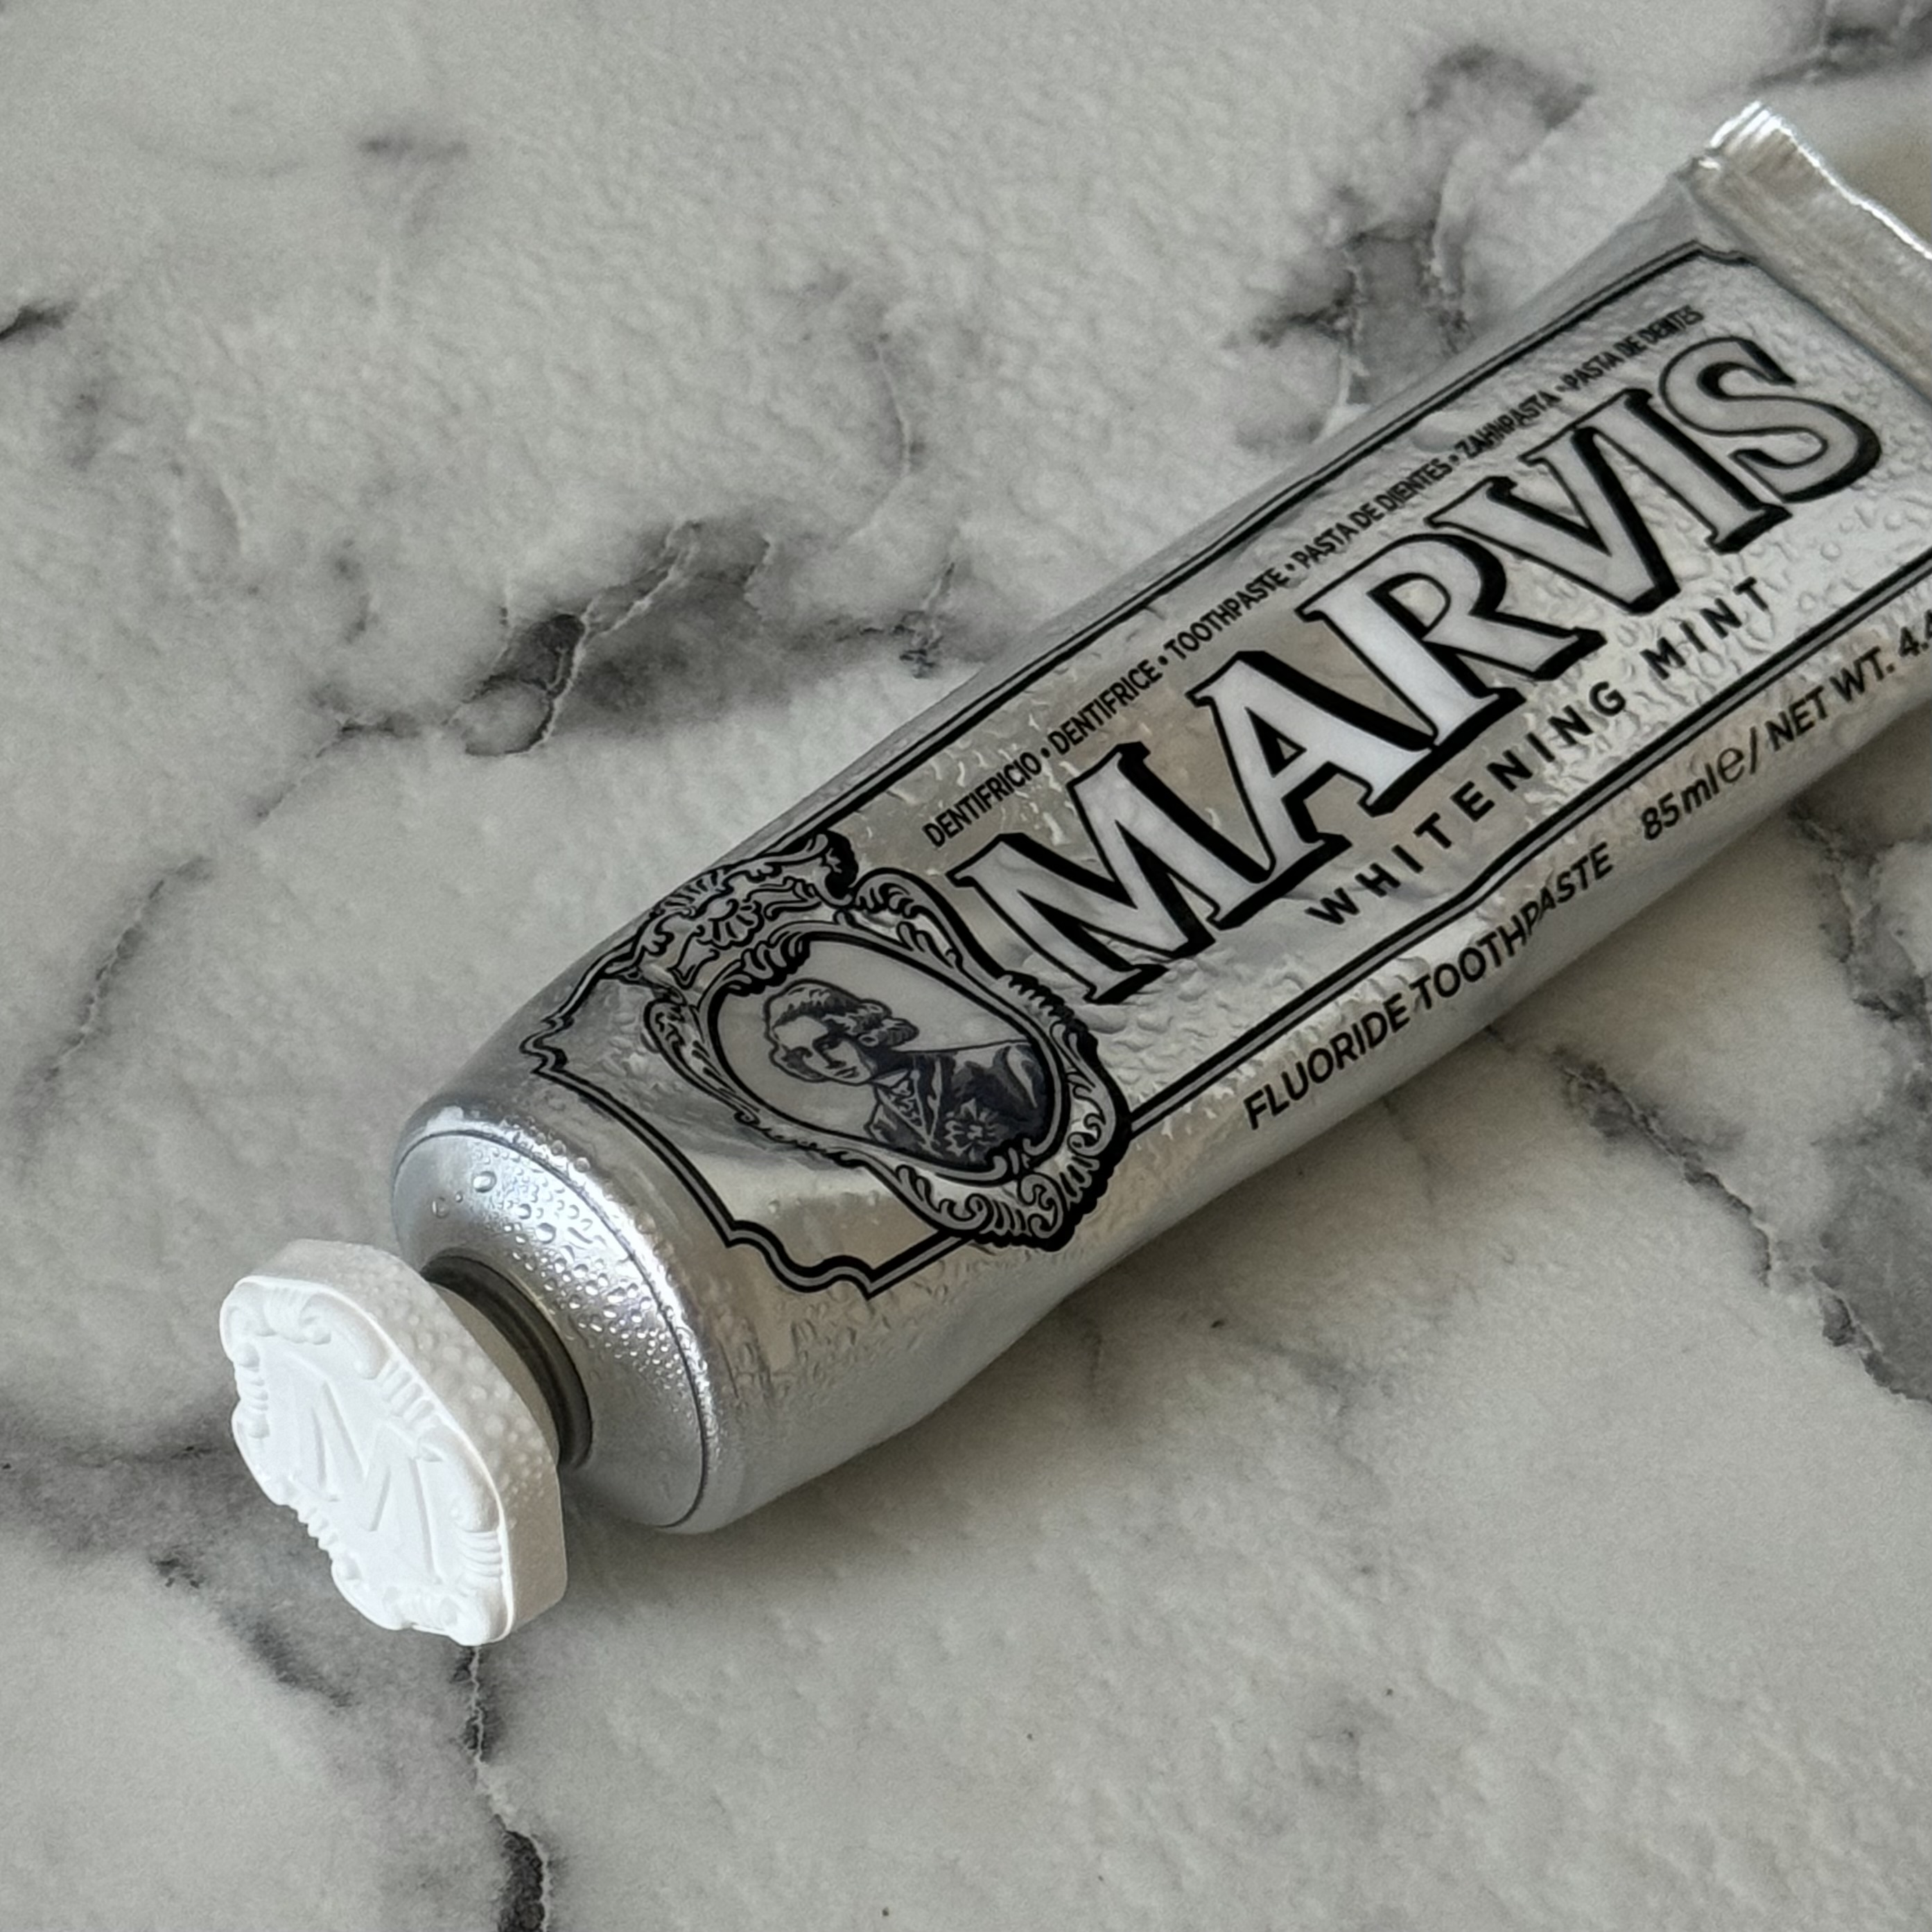 Marvis Whitening Mint + Xylitol